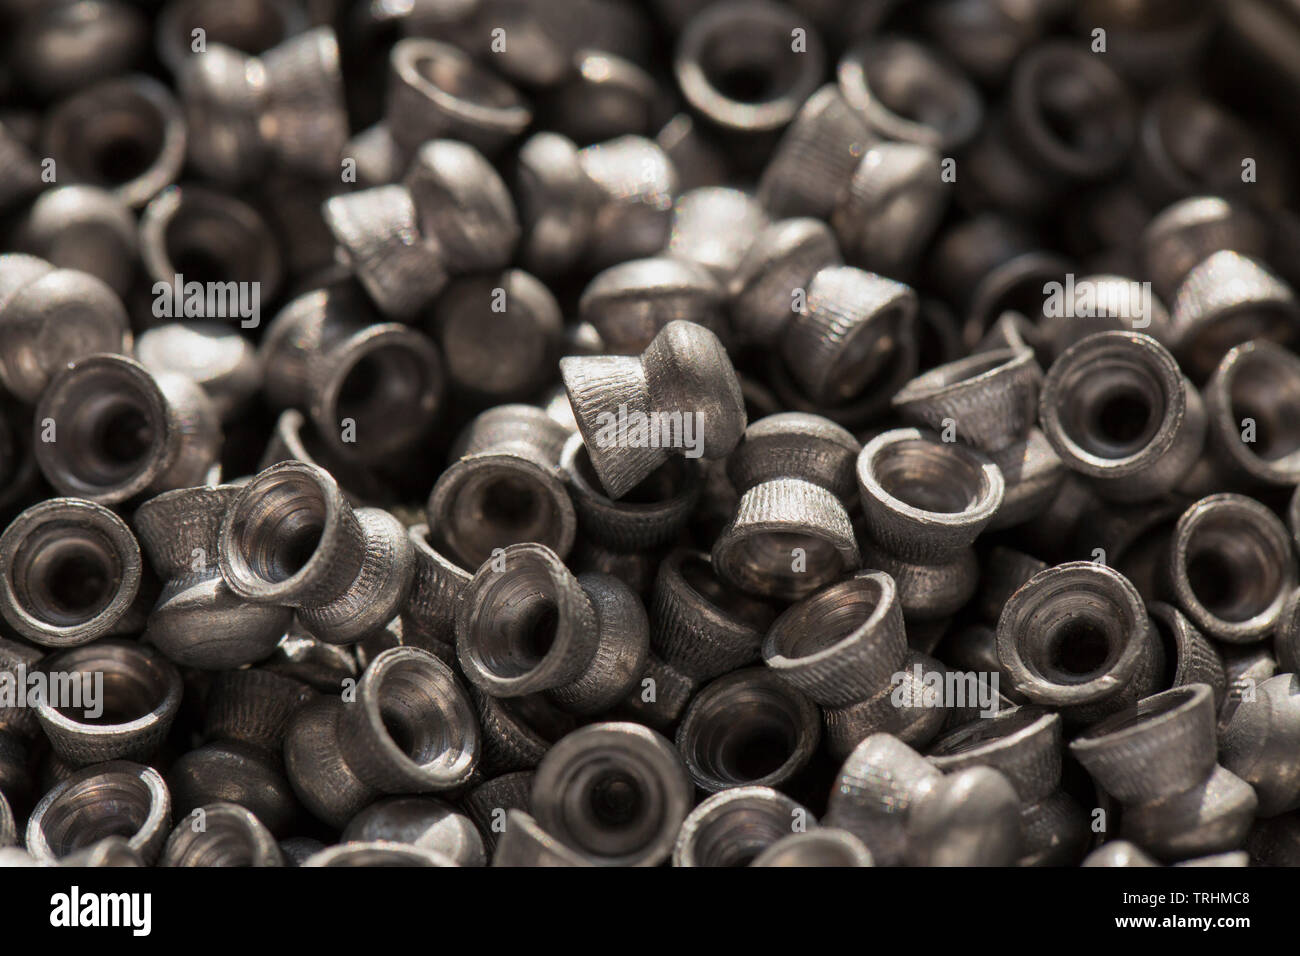 Lead .22 calibre airgun pellets on a dark stone background that can be used in either air rifles or air pistols. England UK GB Stock Photo